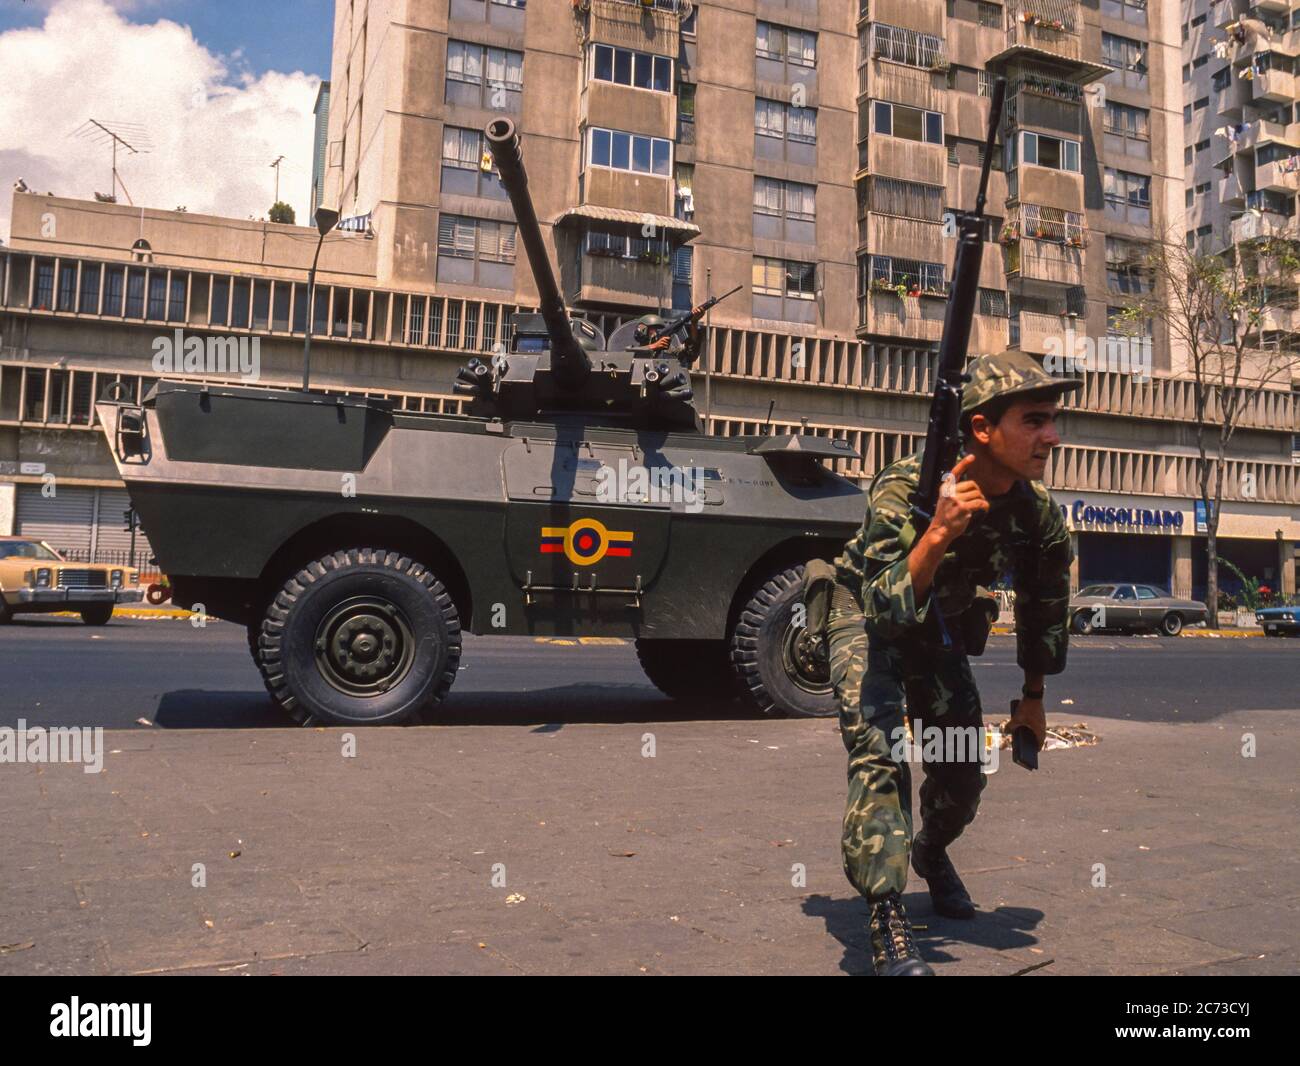 CARACAS, VENEZUELA, MARCH1989 - Soldiers in armored vehicles on street during state of emergency after protests, riots and looting in Caracas, know as the Caracazo. Stock Photo